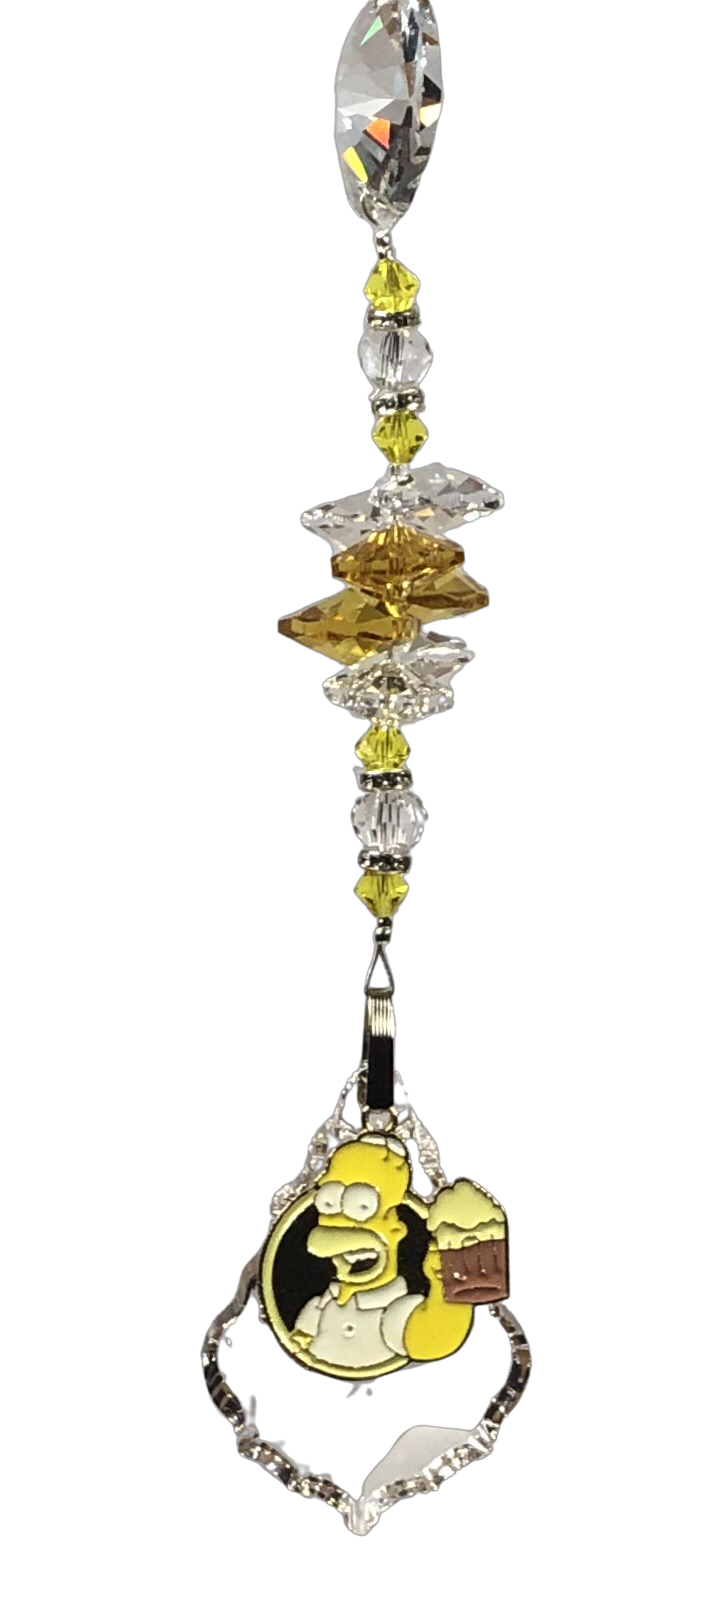 Simpsons - Homer crystal suncatcher, decorated with 50mm Starburst crystal and citrine gemstone.